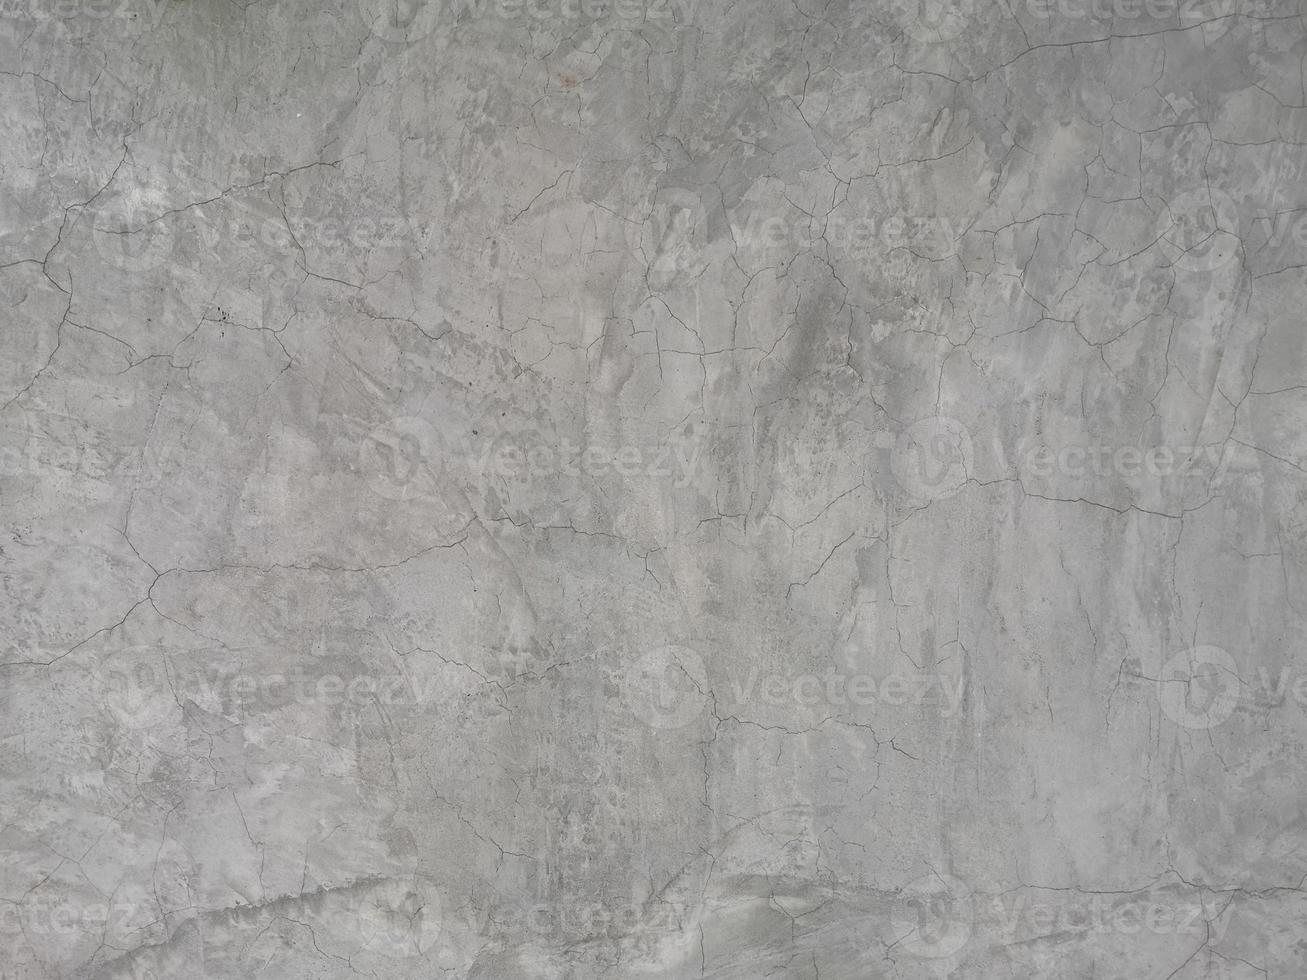 cement wall gray color smooth surface texture concrete material background detail architect construction photo